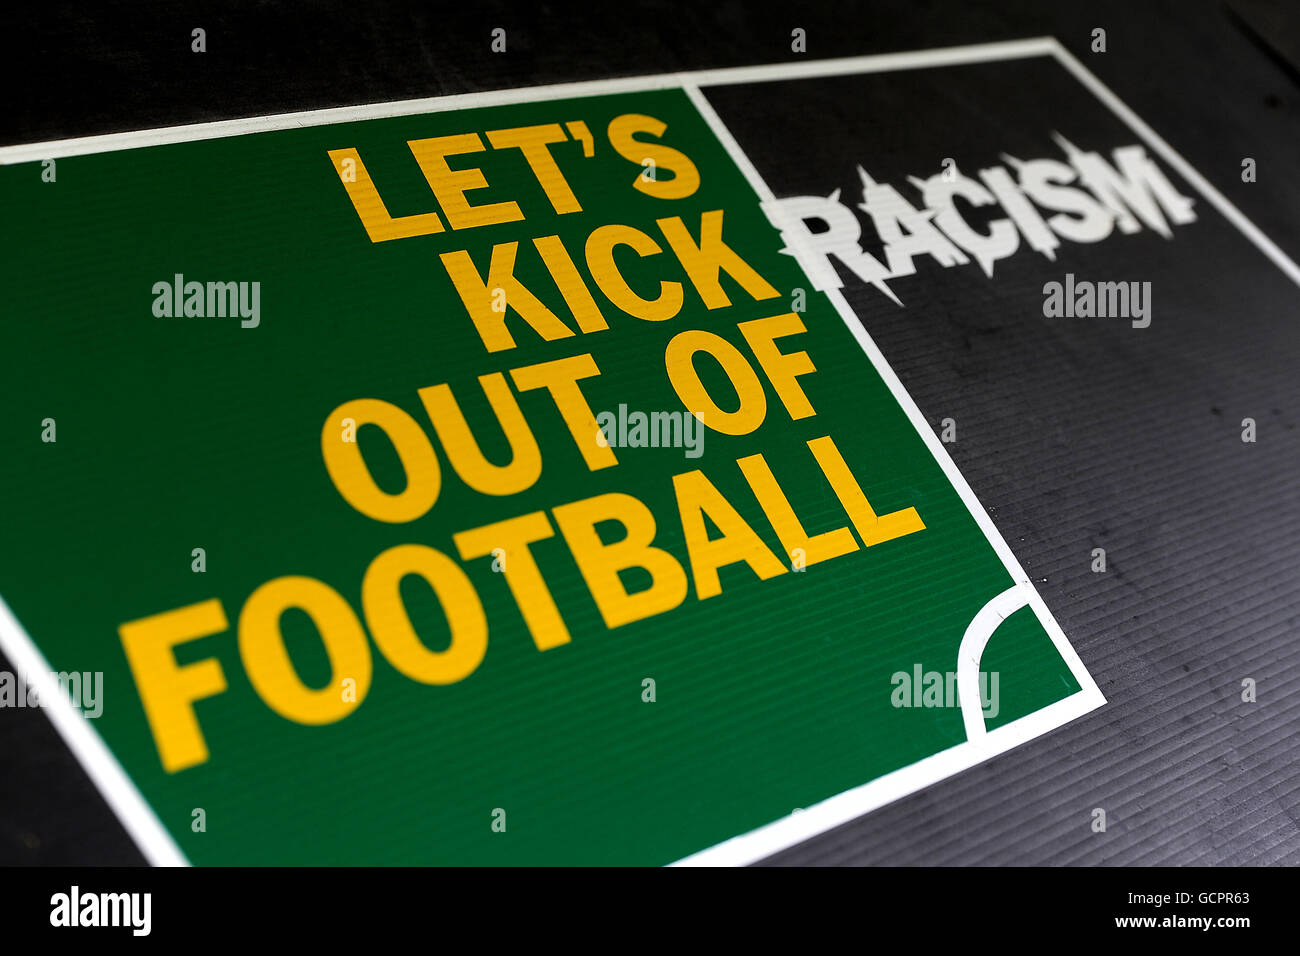 General View Of A Sign Saying Let S Kick Racism Out Of Football Stock Photo Alamy